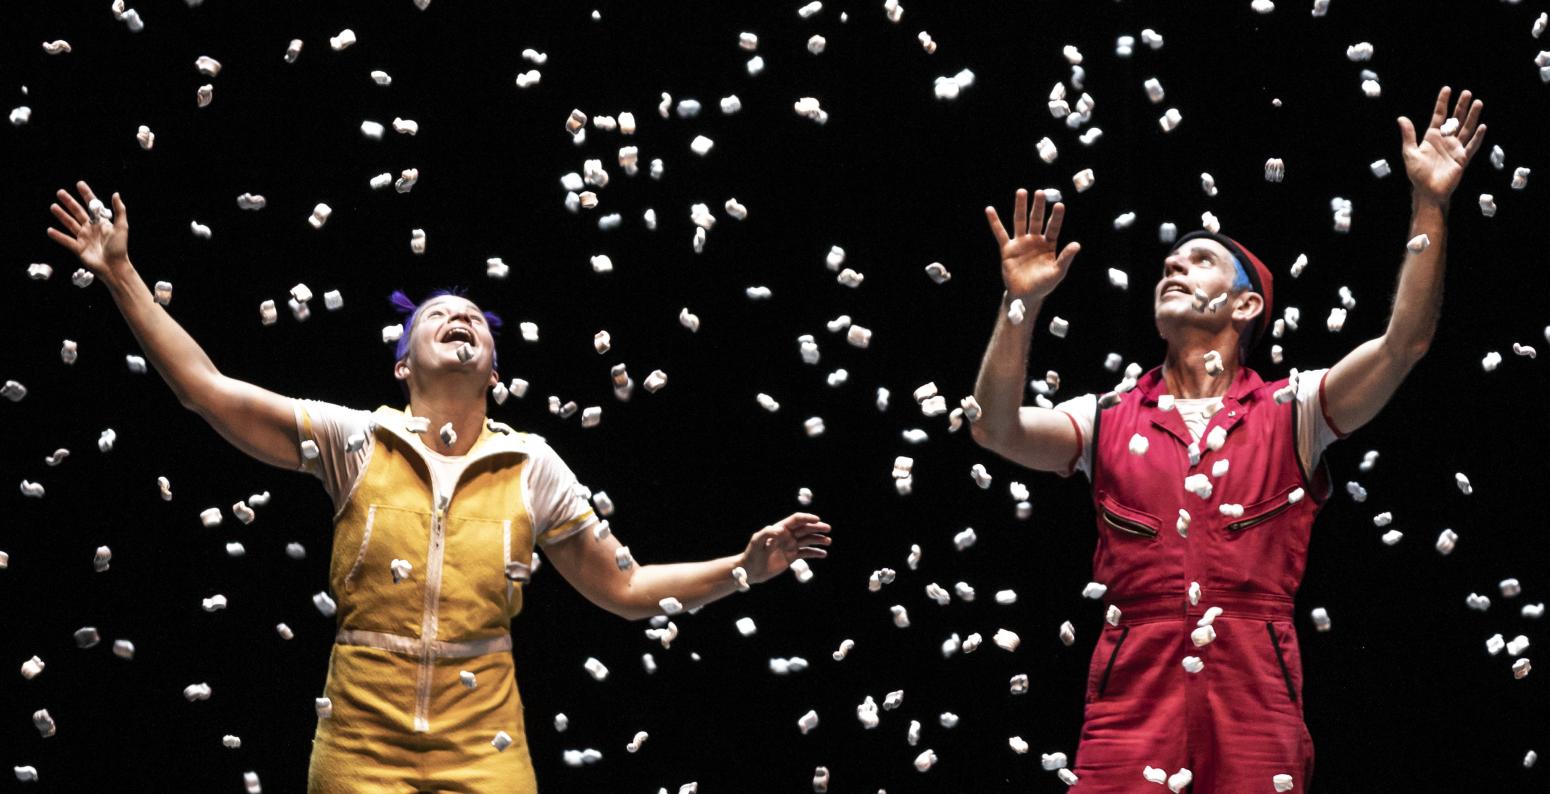 Two people on stage in front of a black background with white confetti